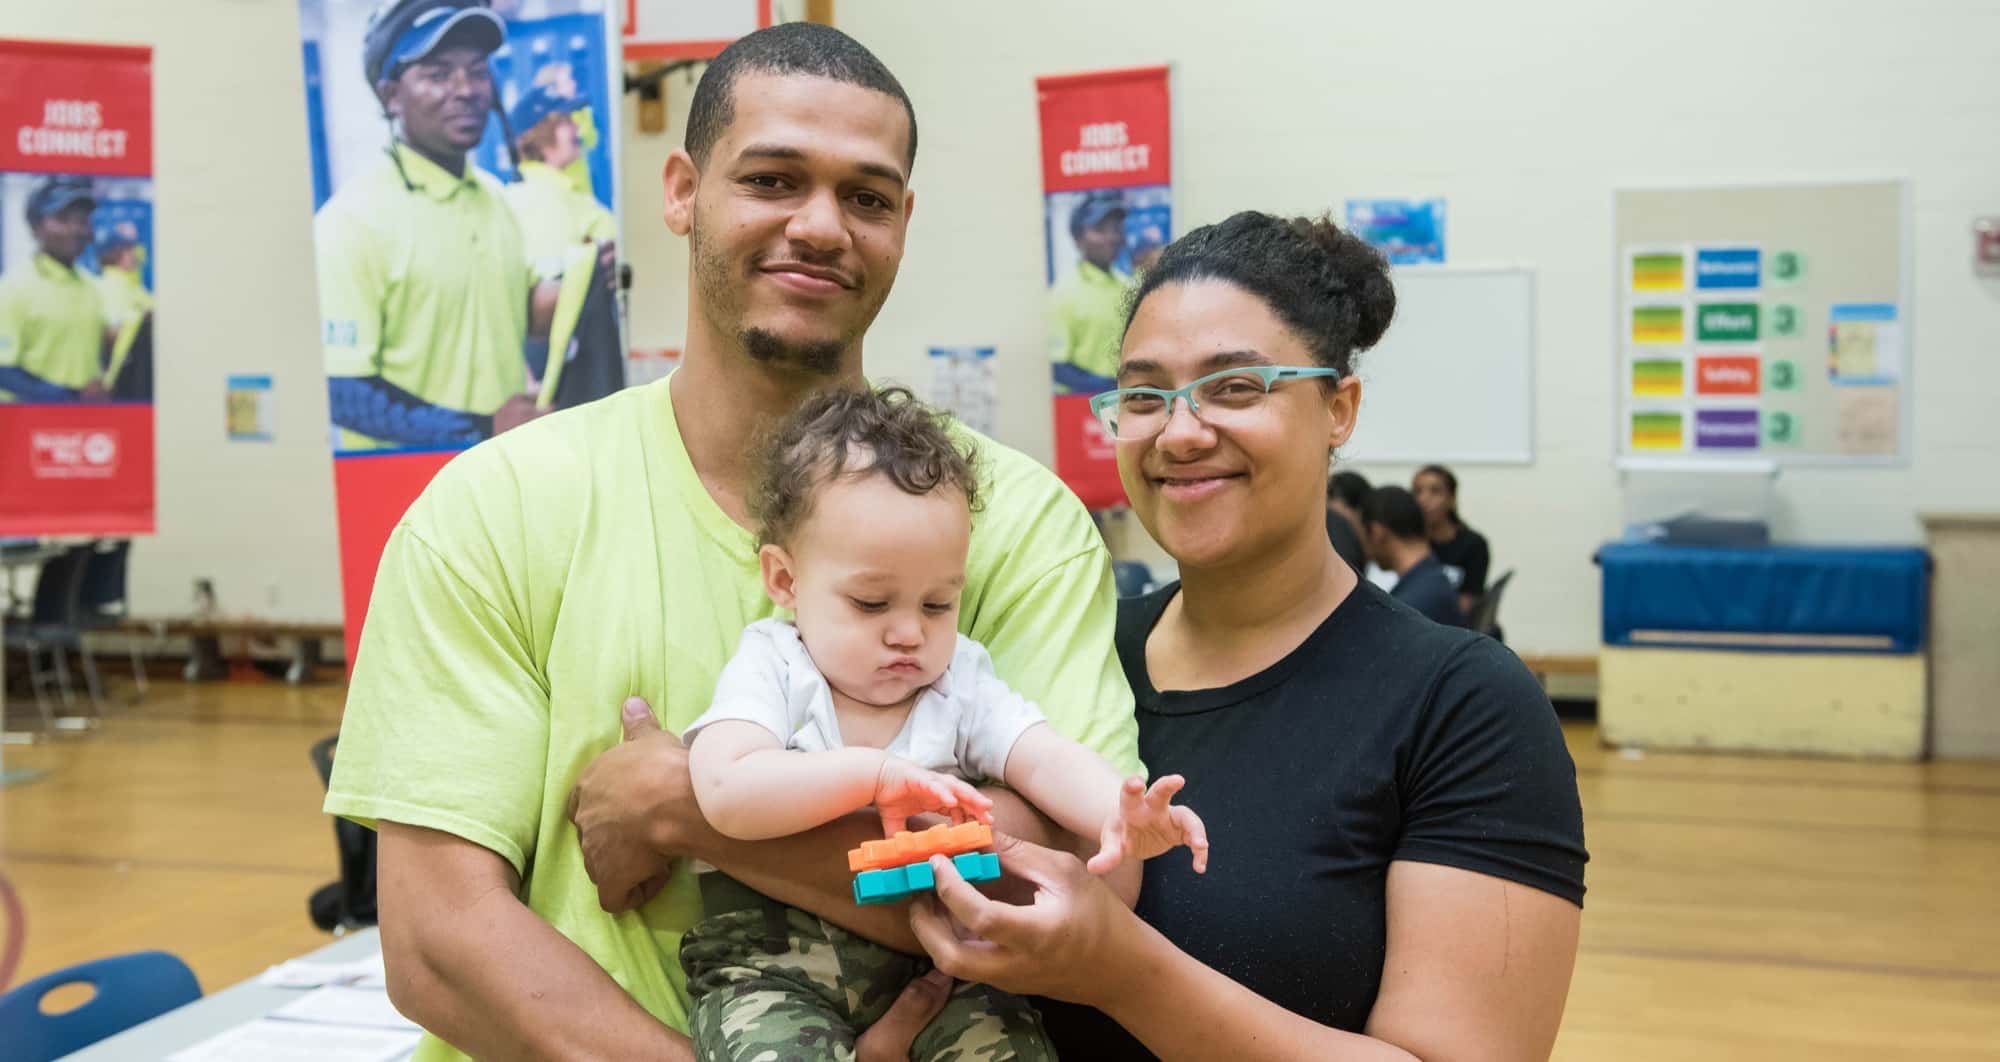 Photo of a 20-something man in a bright yellow shirt, holding a one-year-baby and a 20-something woman in green eyeglasses and black shirt with her arm around the man